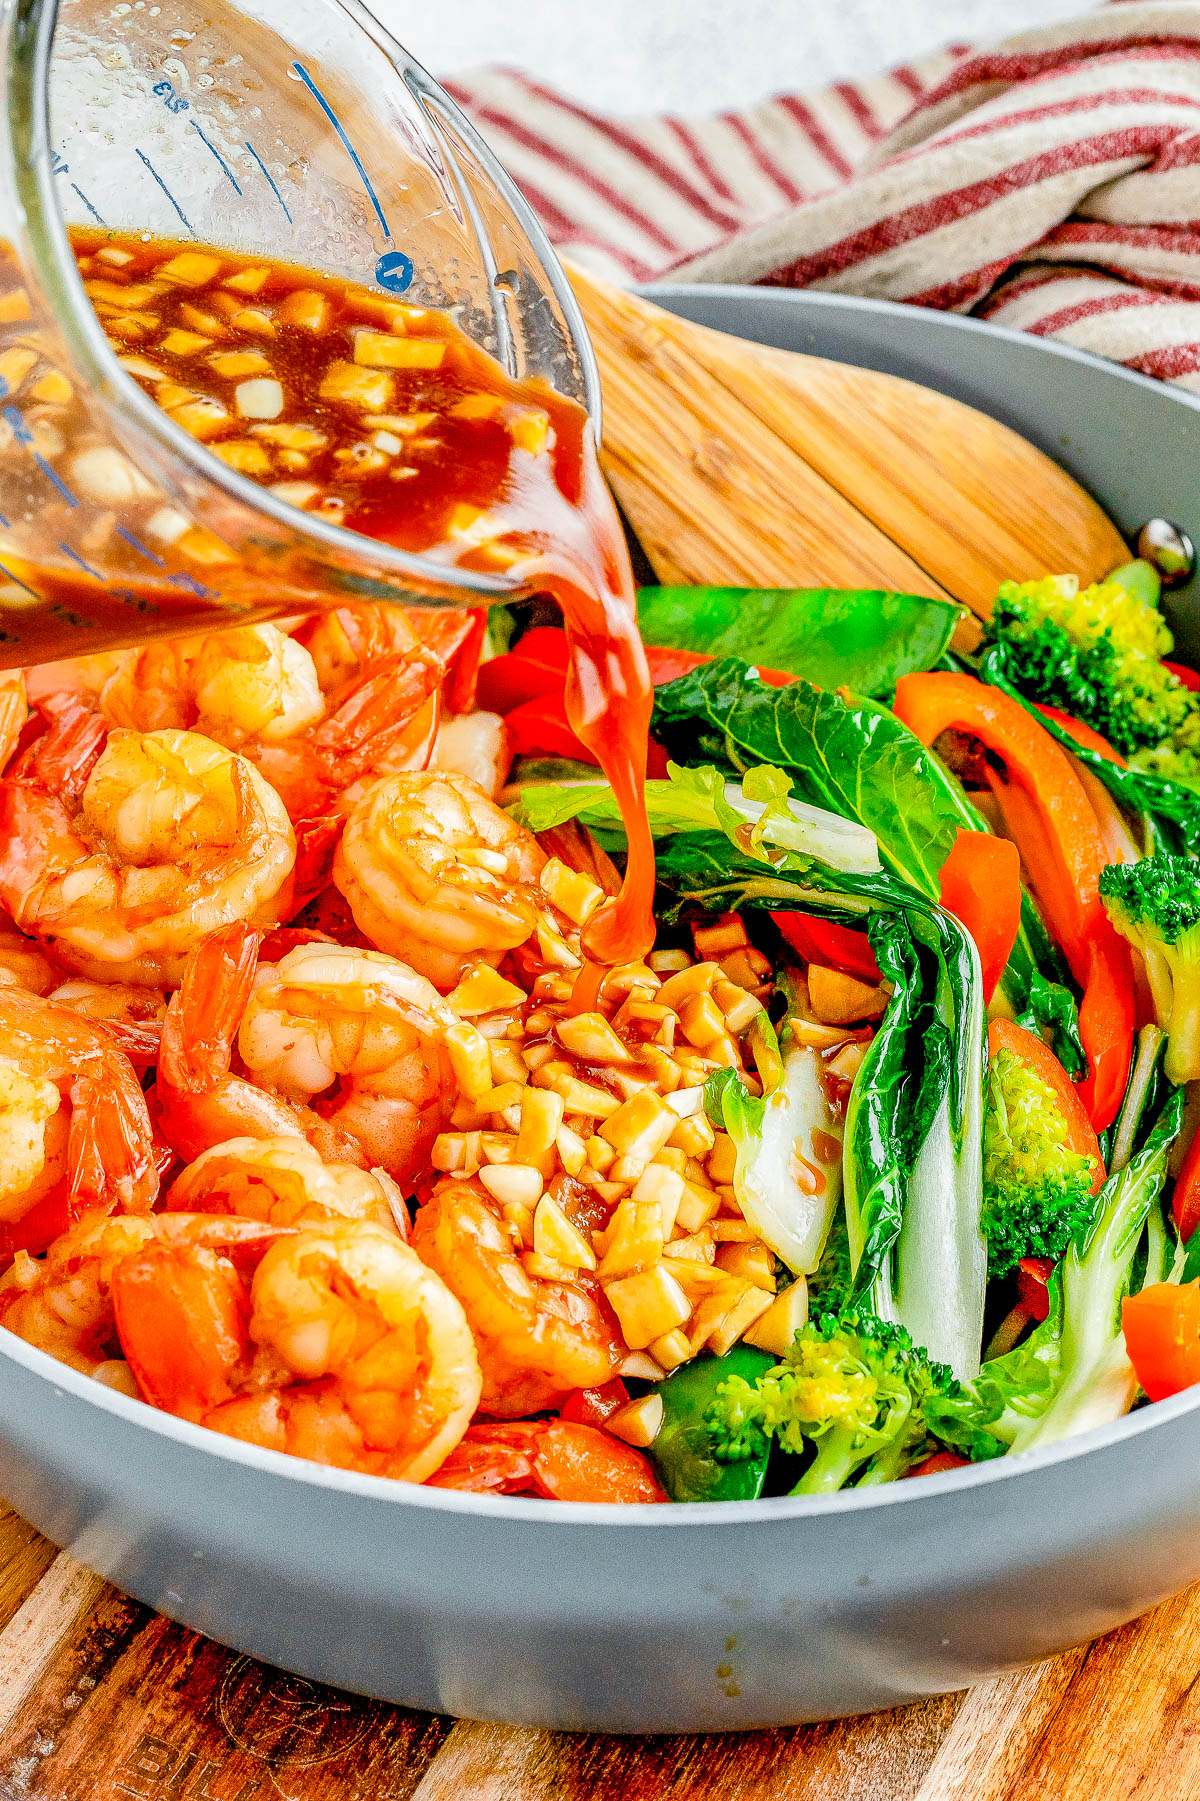 Garlic Shrimp Stir-Fry — Made with juicy shrimp, crisp-tender veggies, and a homemade stir-fry sauce, this stir-fry is QUICK and EASY! It’s ready in just 25 minutes and tastes so much better than takeout! Serve the stir-fry with noodles or rice for a complete meal.